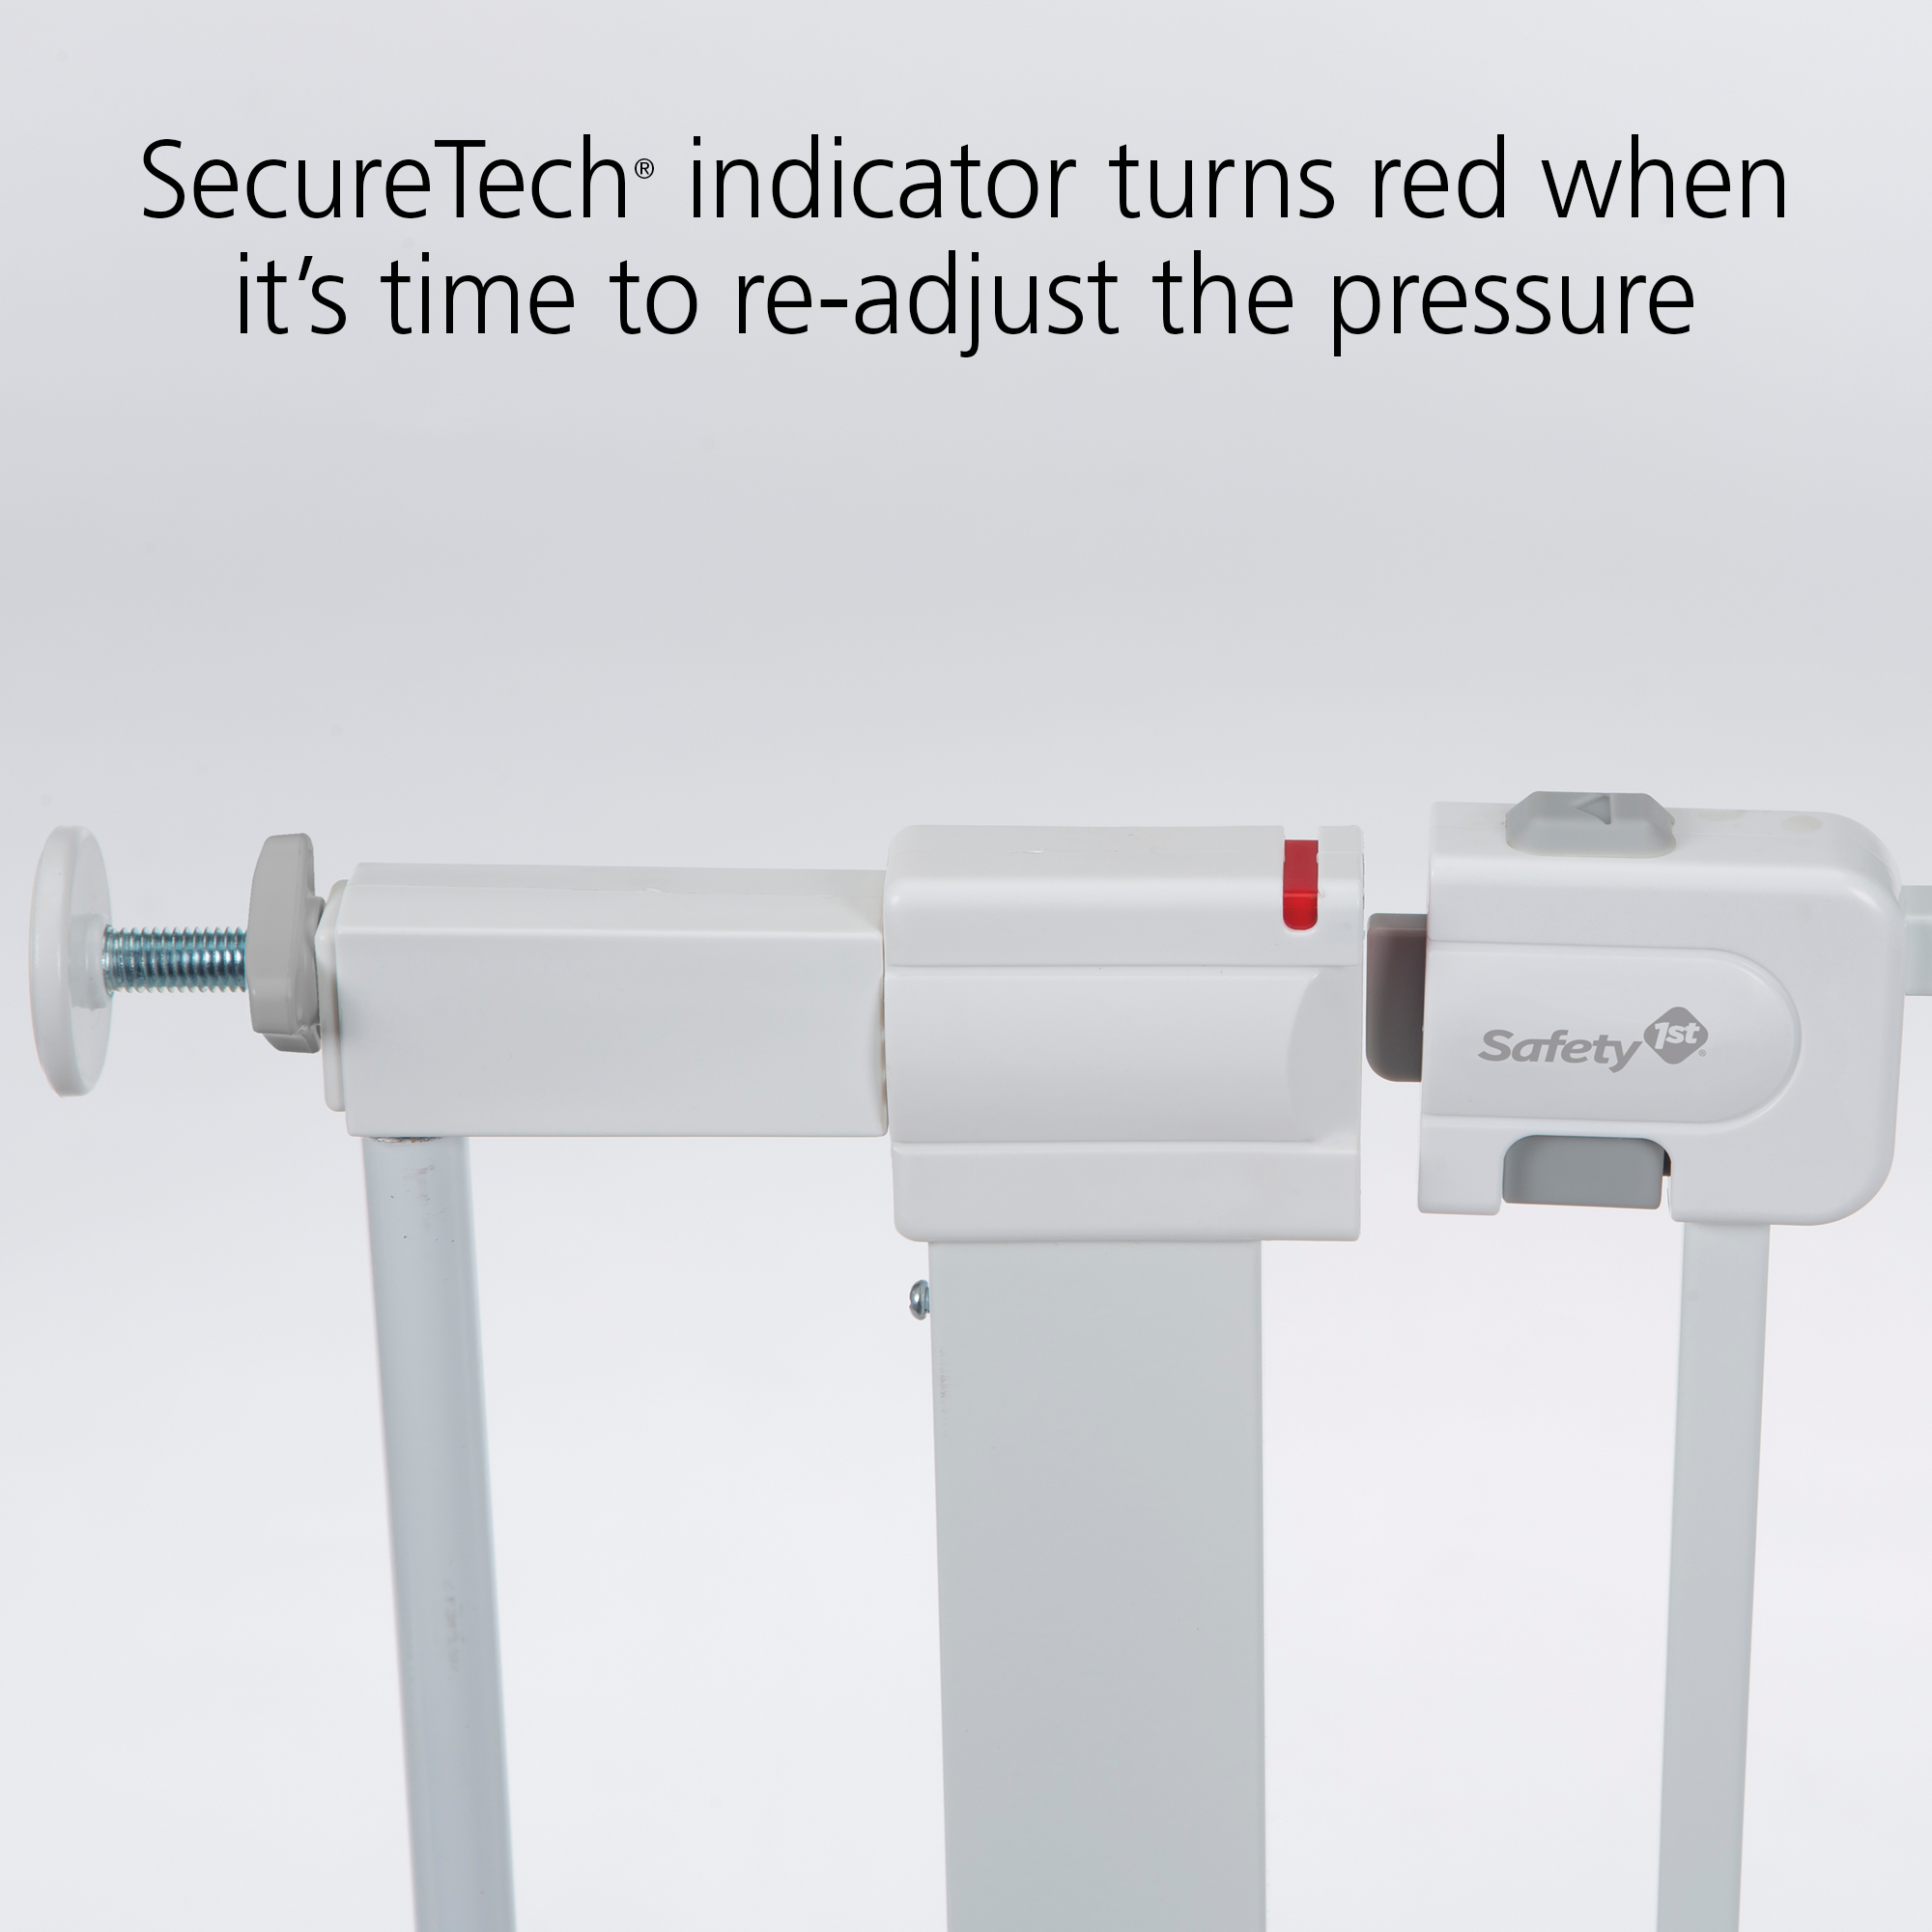 Baby gate with SecureTech indicator that turns red when it's time to re-adjust the pressure.